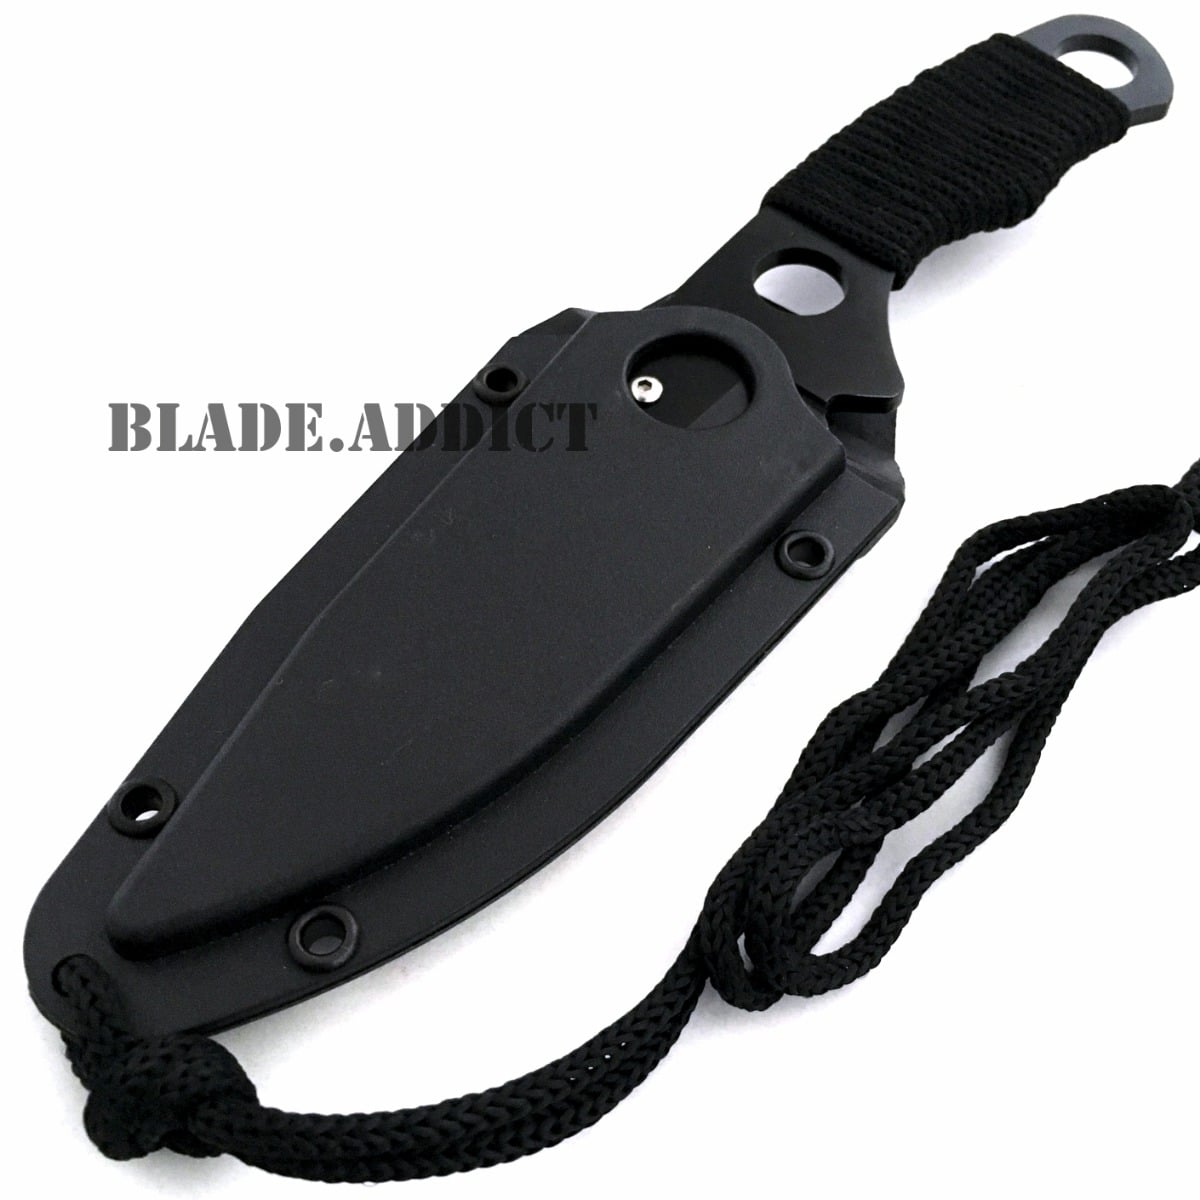 7" TACTICAL MILITARY COMBAT FIXED BLADE NECK KNIFE DAGGER BOOT POCKET CAMPING